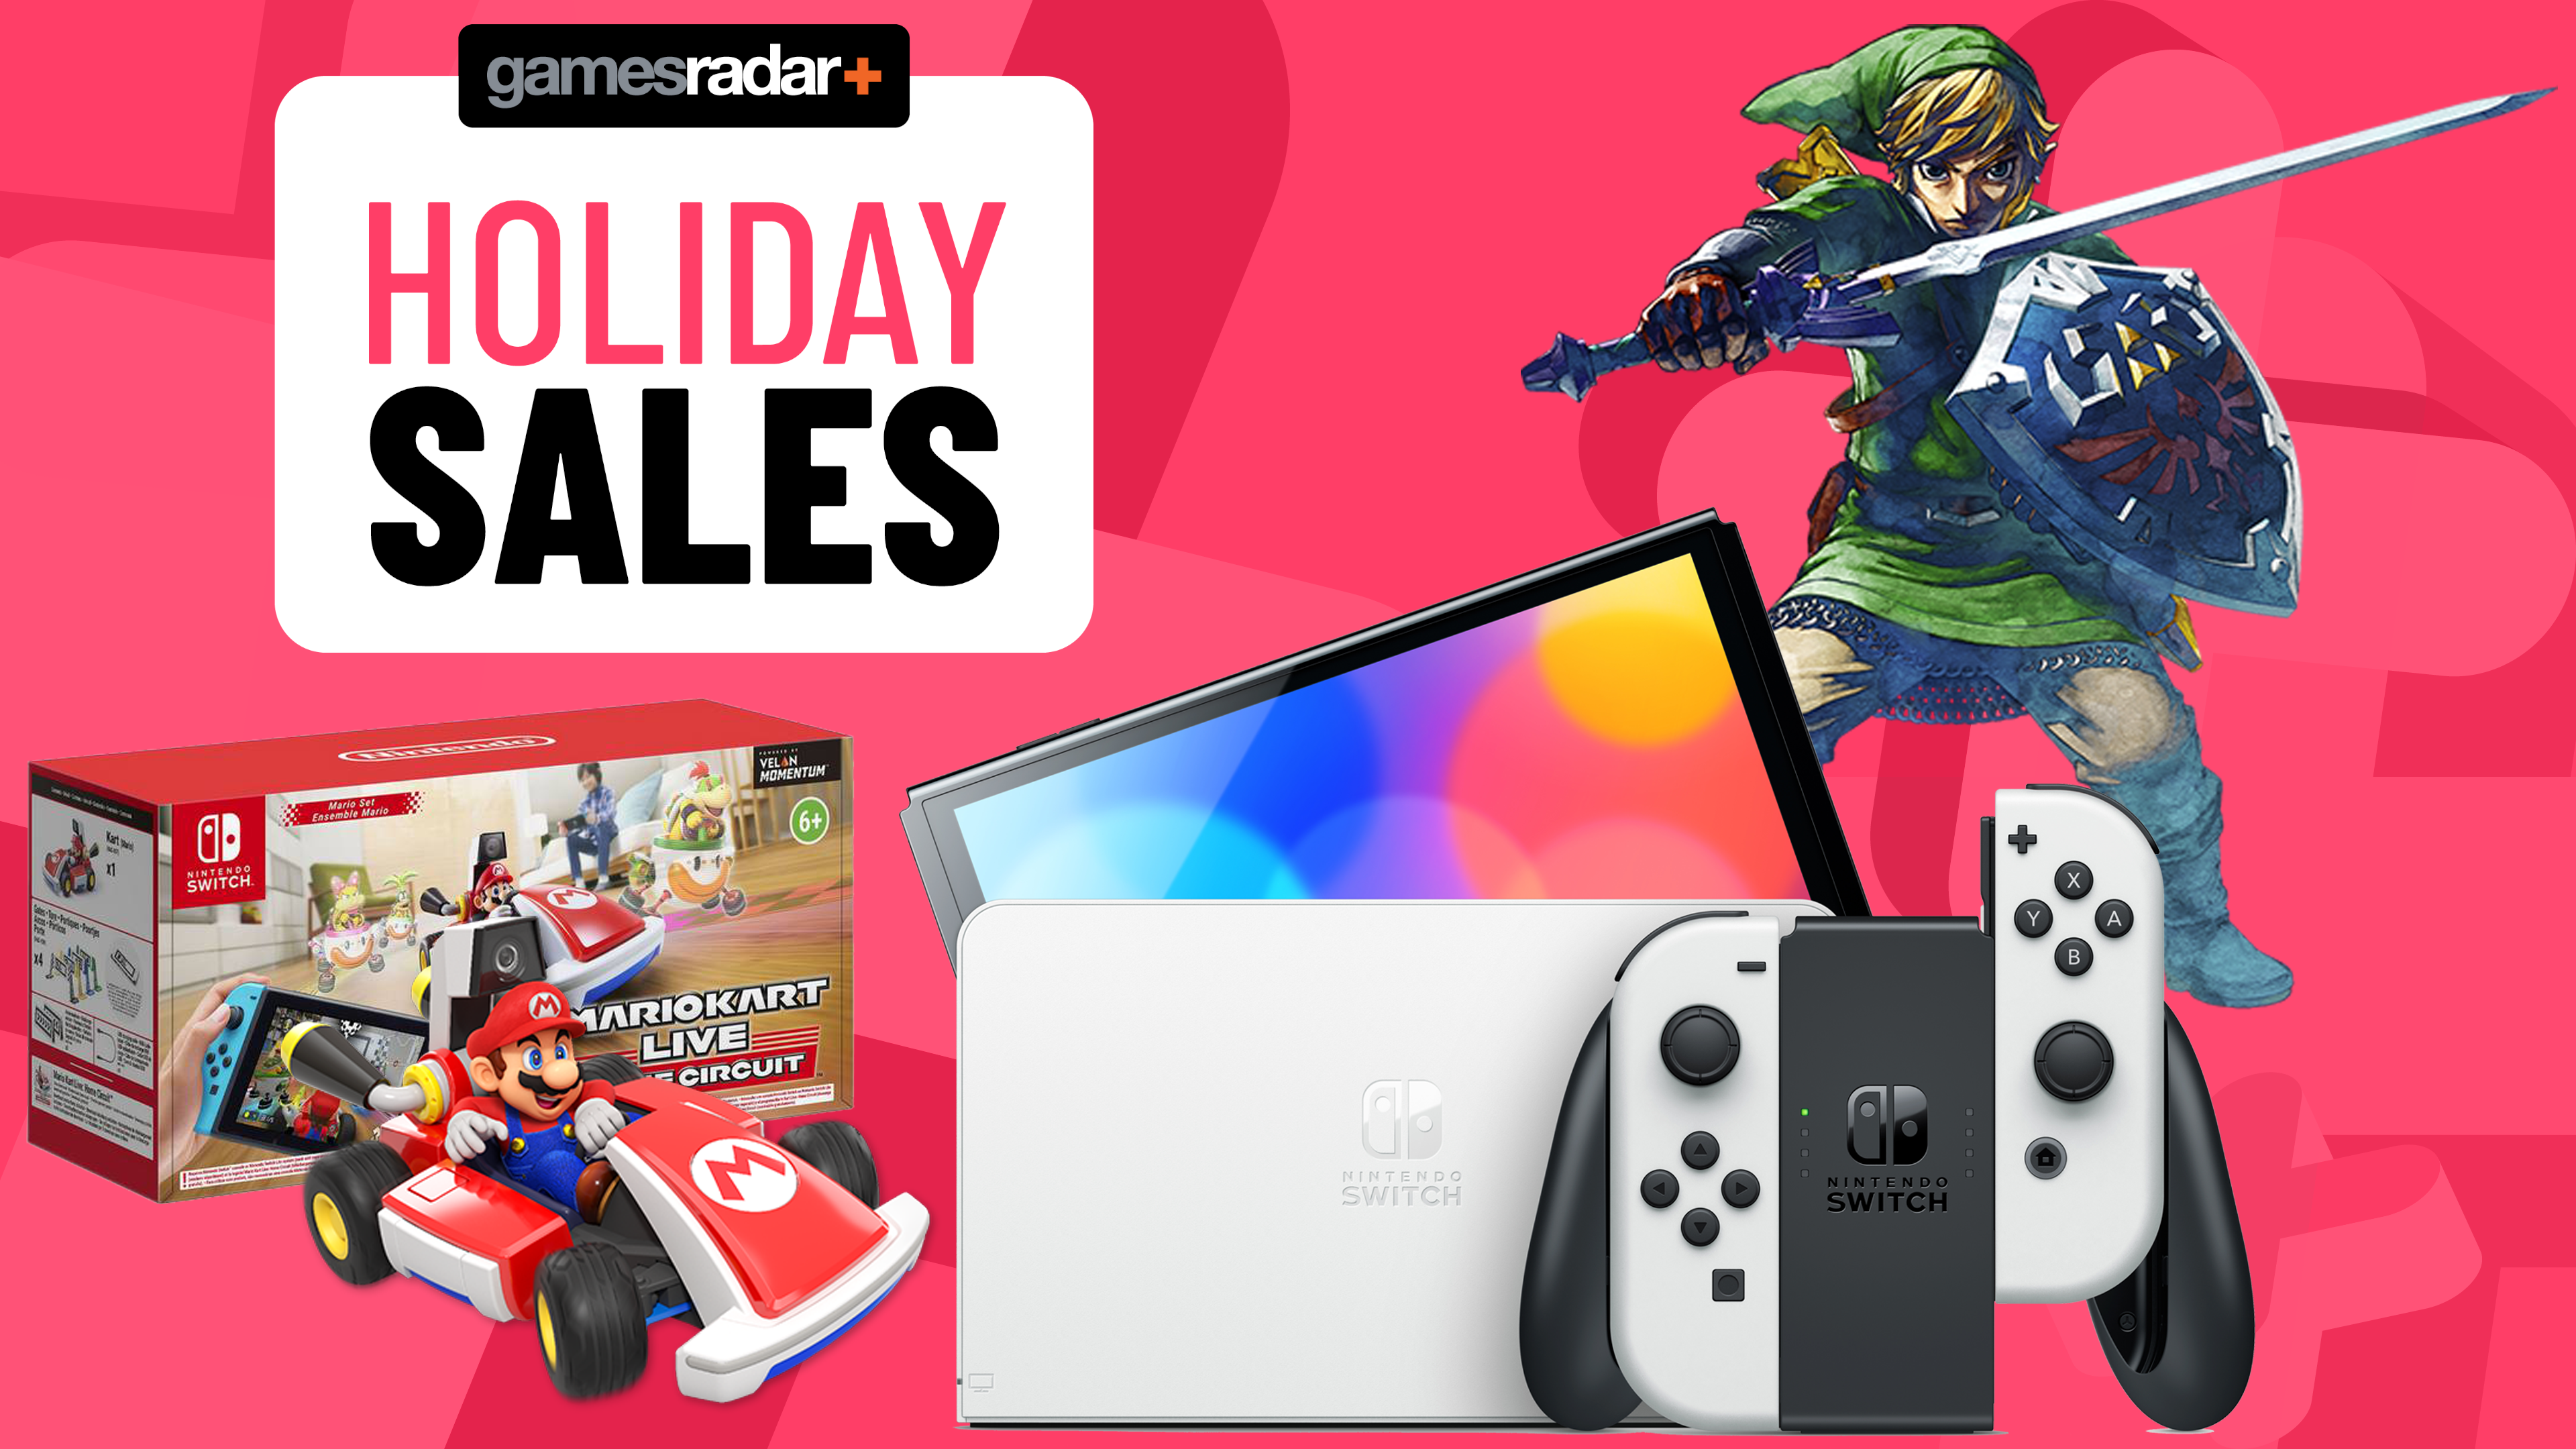 Nintendo UK Black Friday deal offers a Switch OLED with Mario Kart